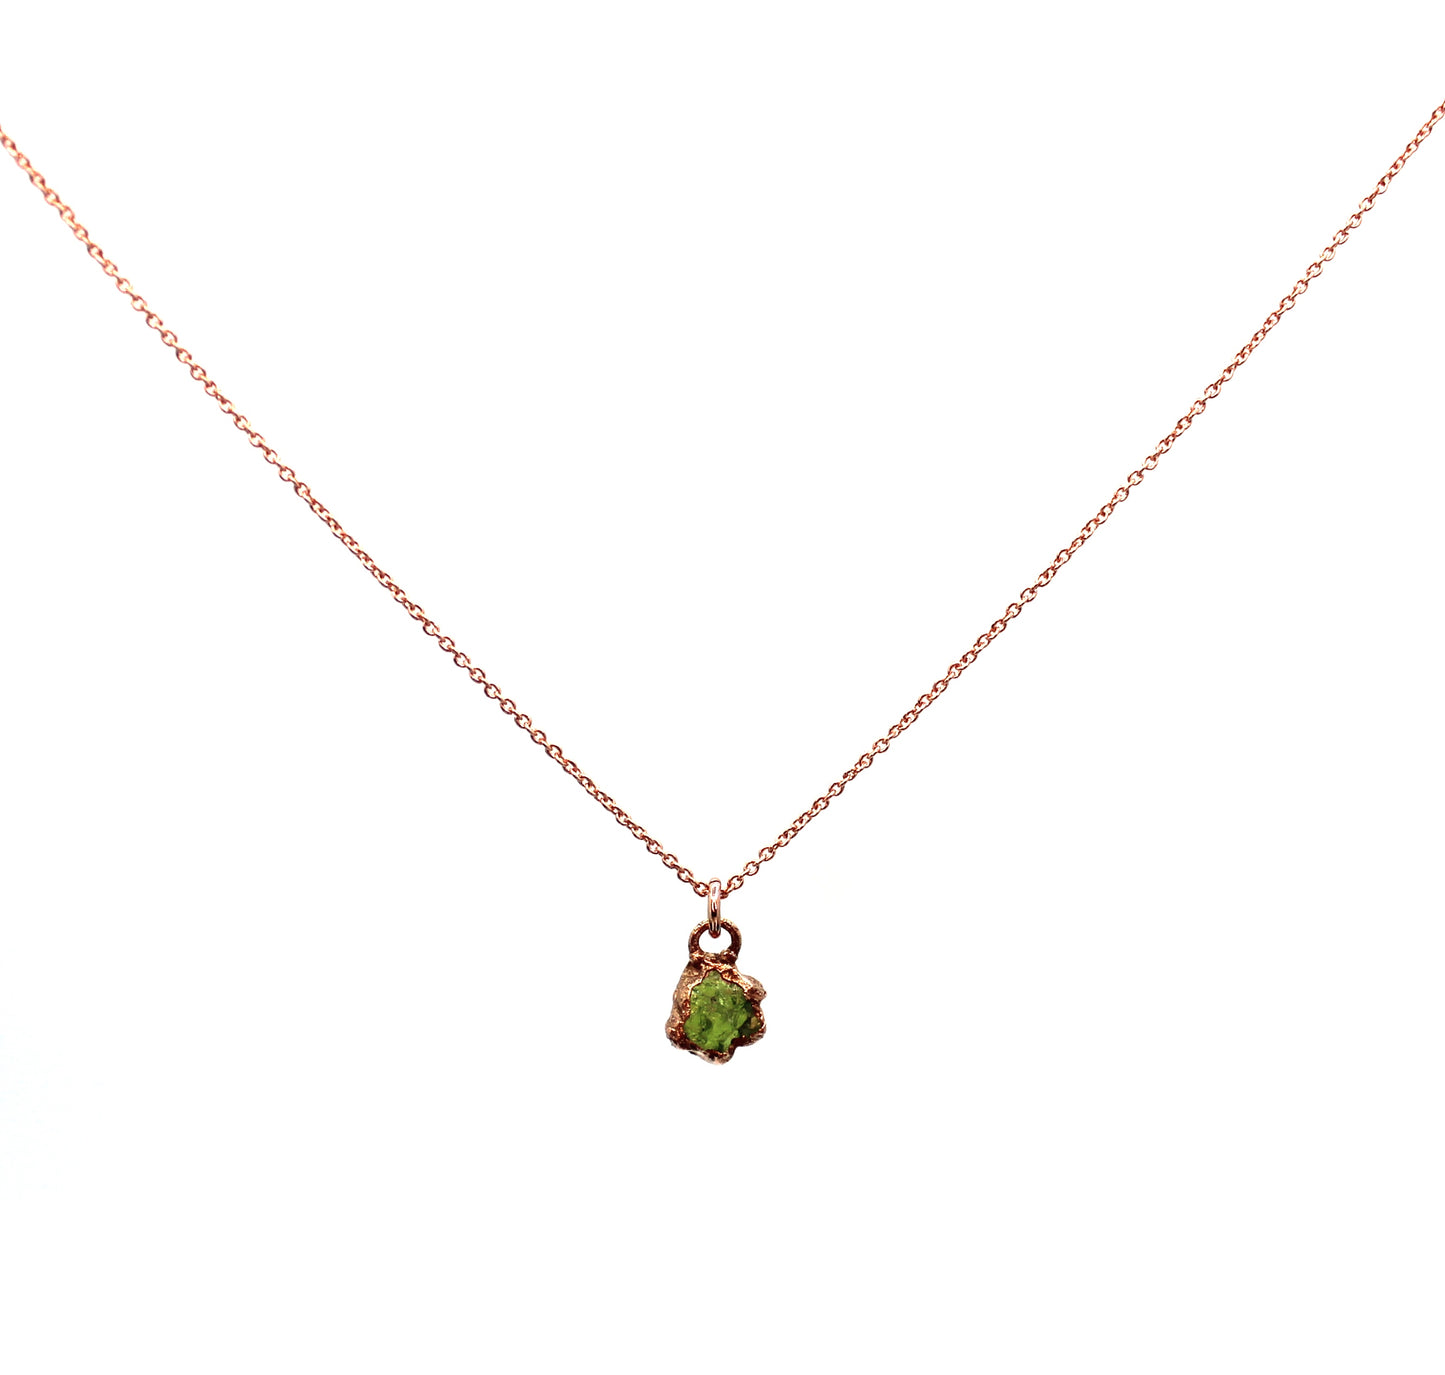 Small Peridot Necklace (August Birthstone)